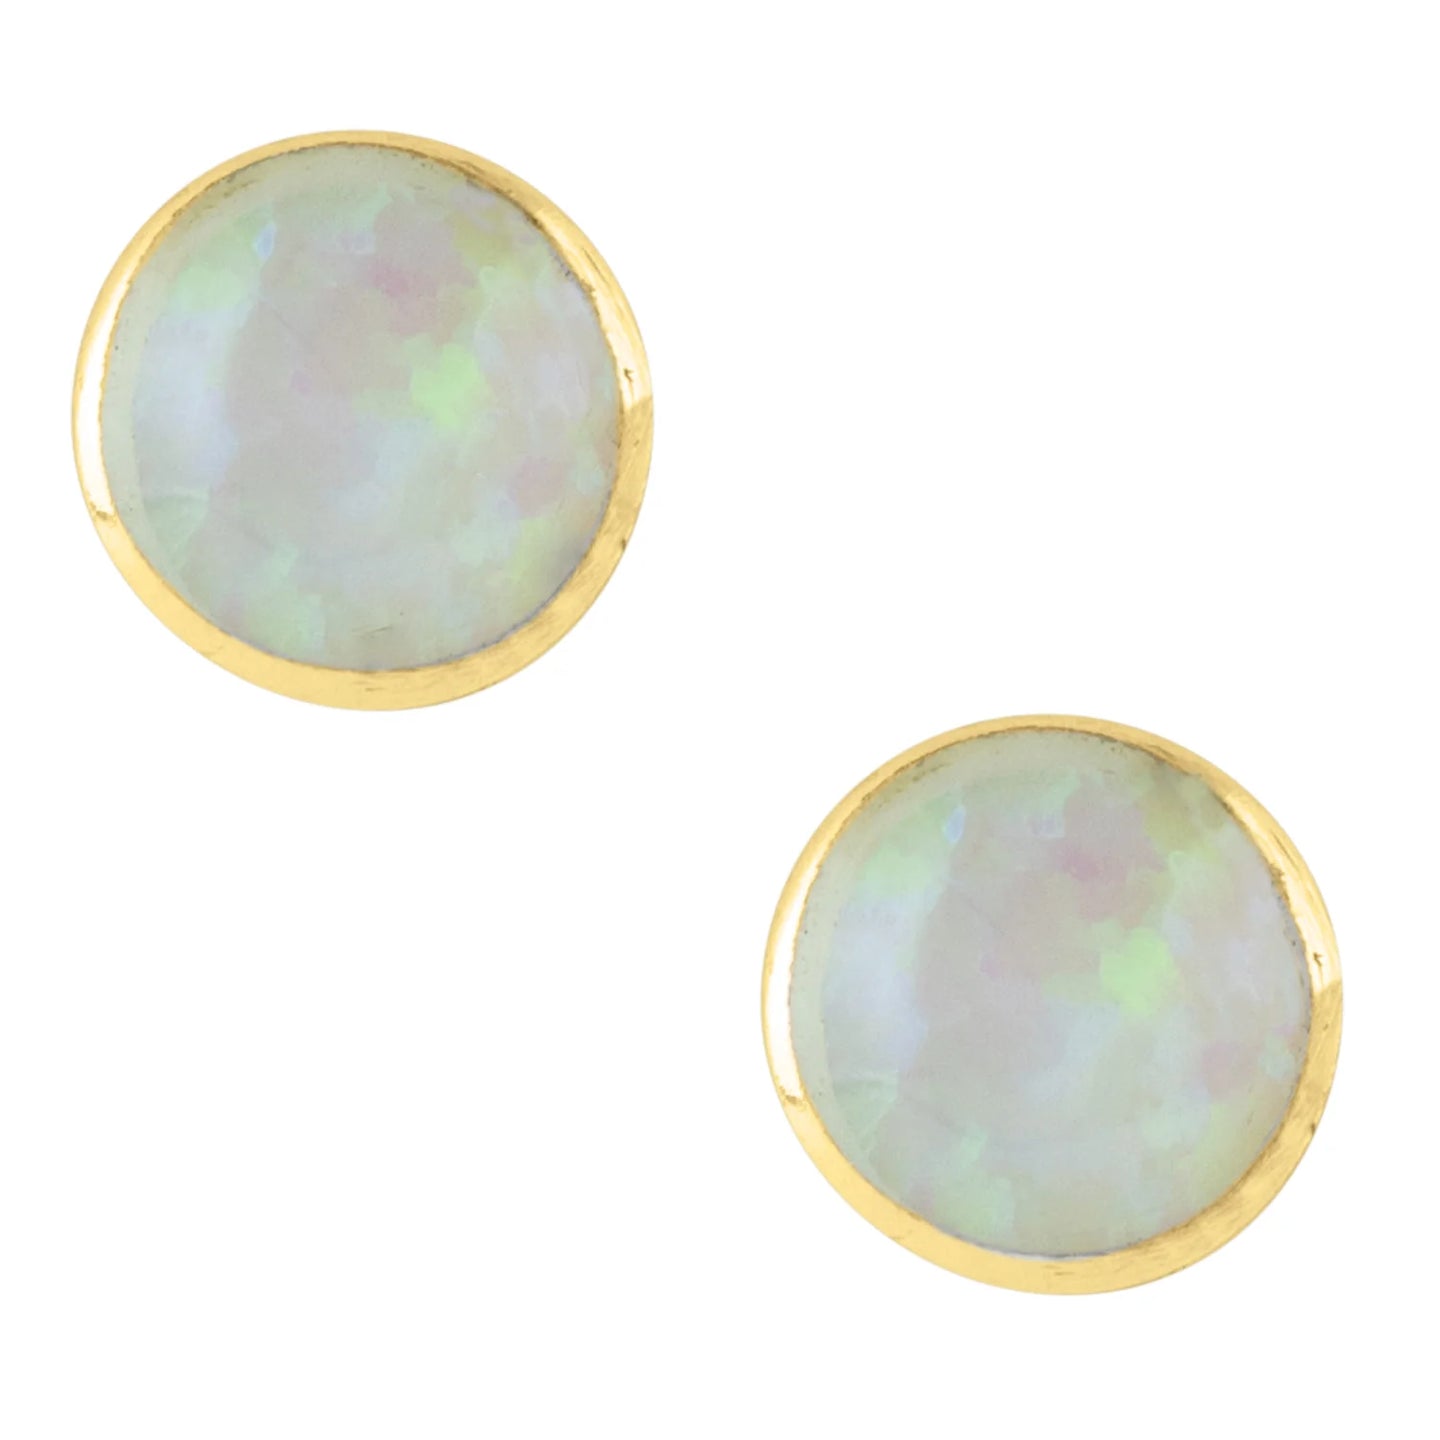 Tomas White Opal Studs - Gold - 5mm-20806